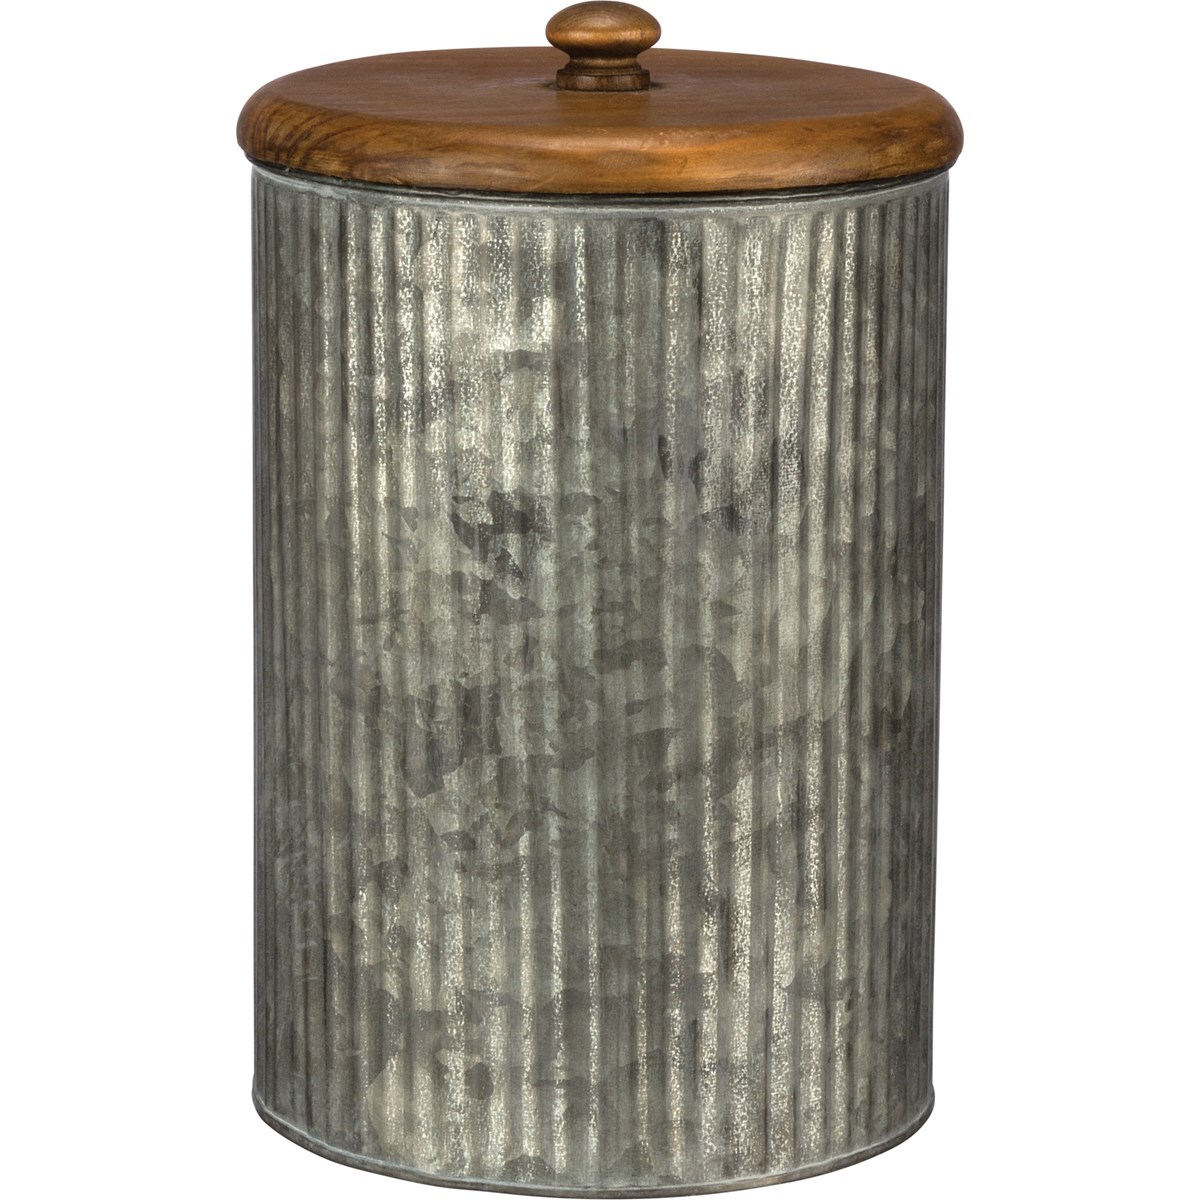 Canister Set - Galvanized - 6.75" x 11.50", 6" x 9.75", 5.25" x 8.25" - Metal, Wood